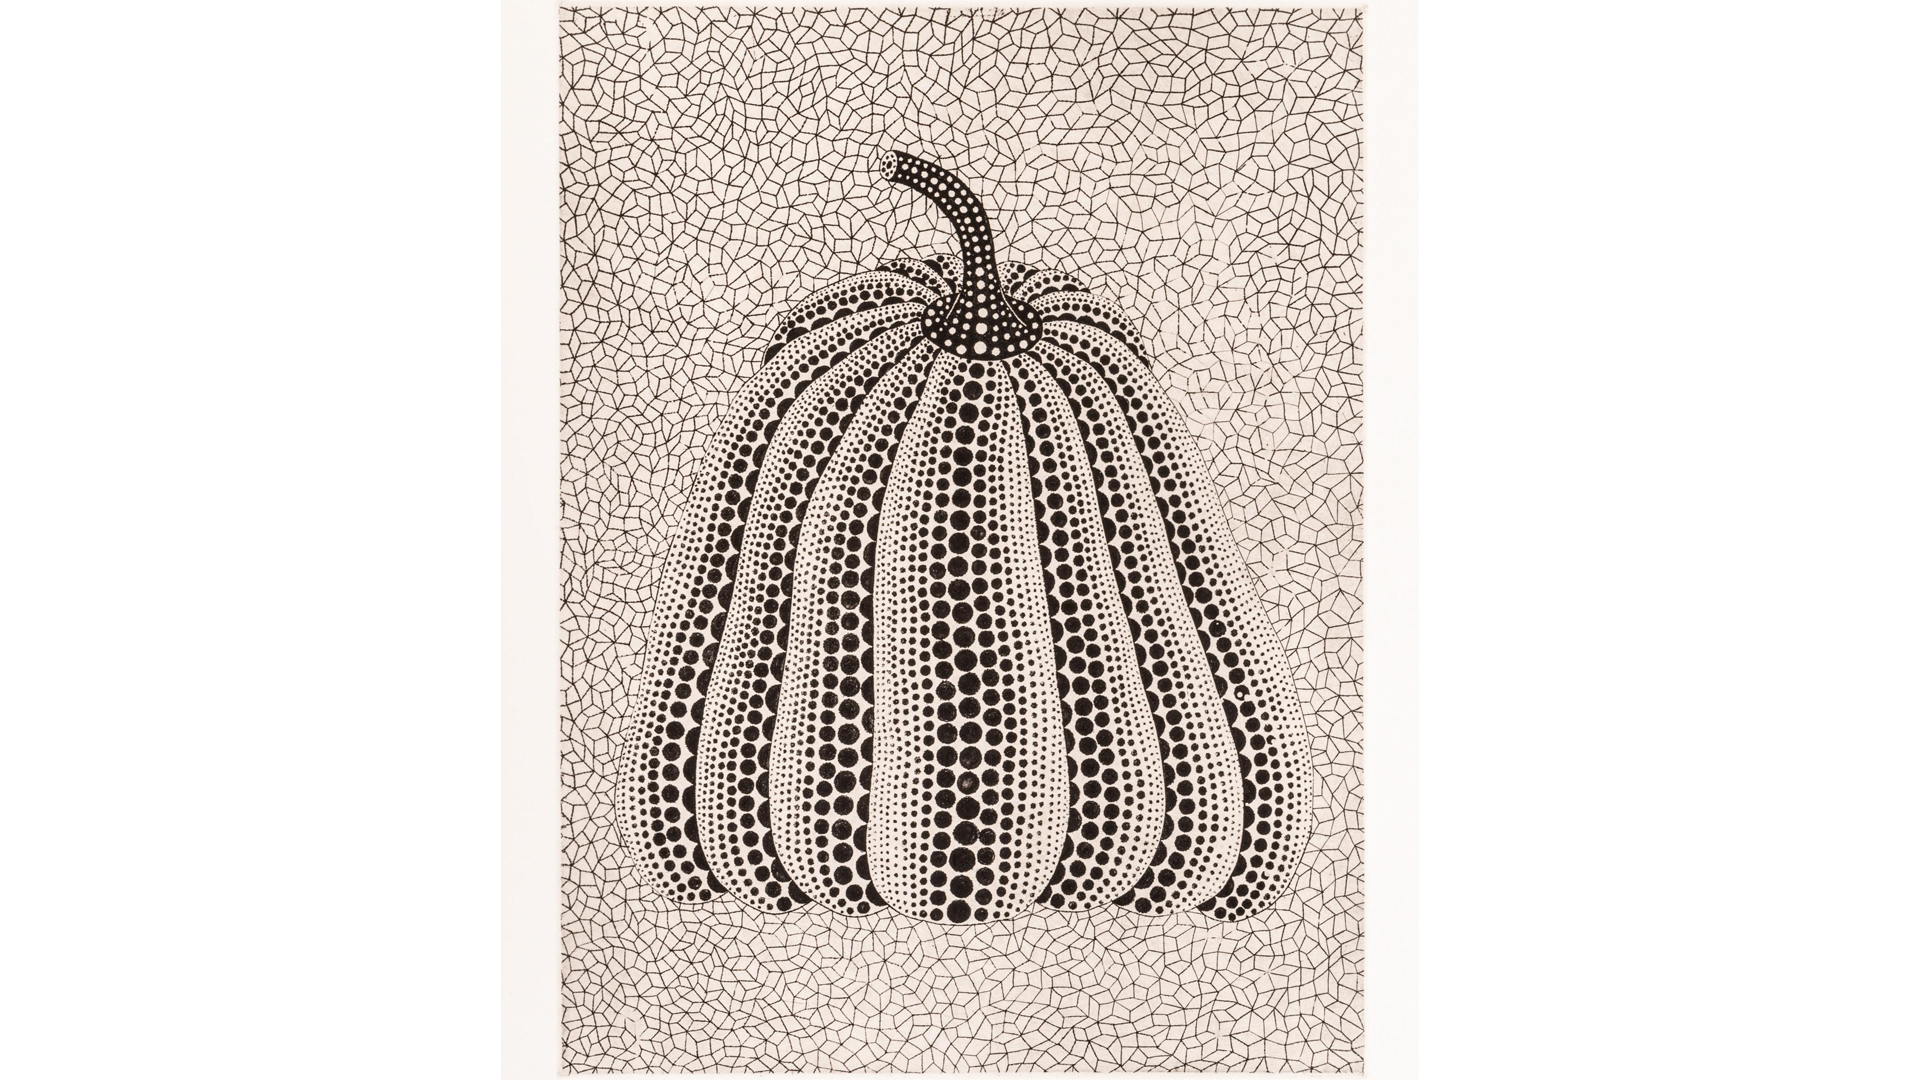 Black and white print showing a pumpkin.